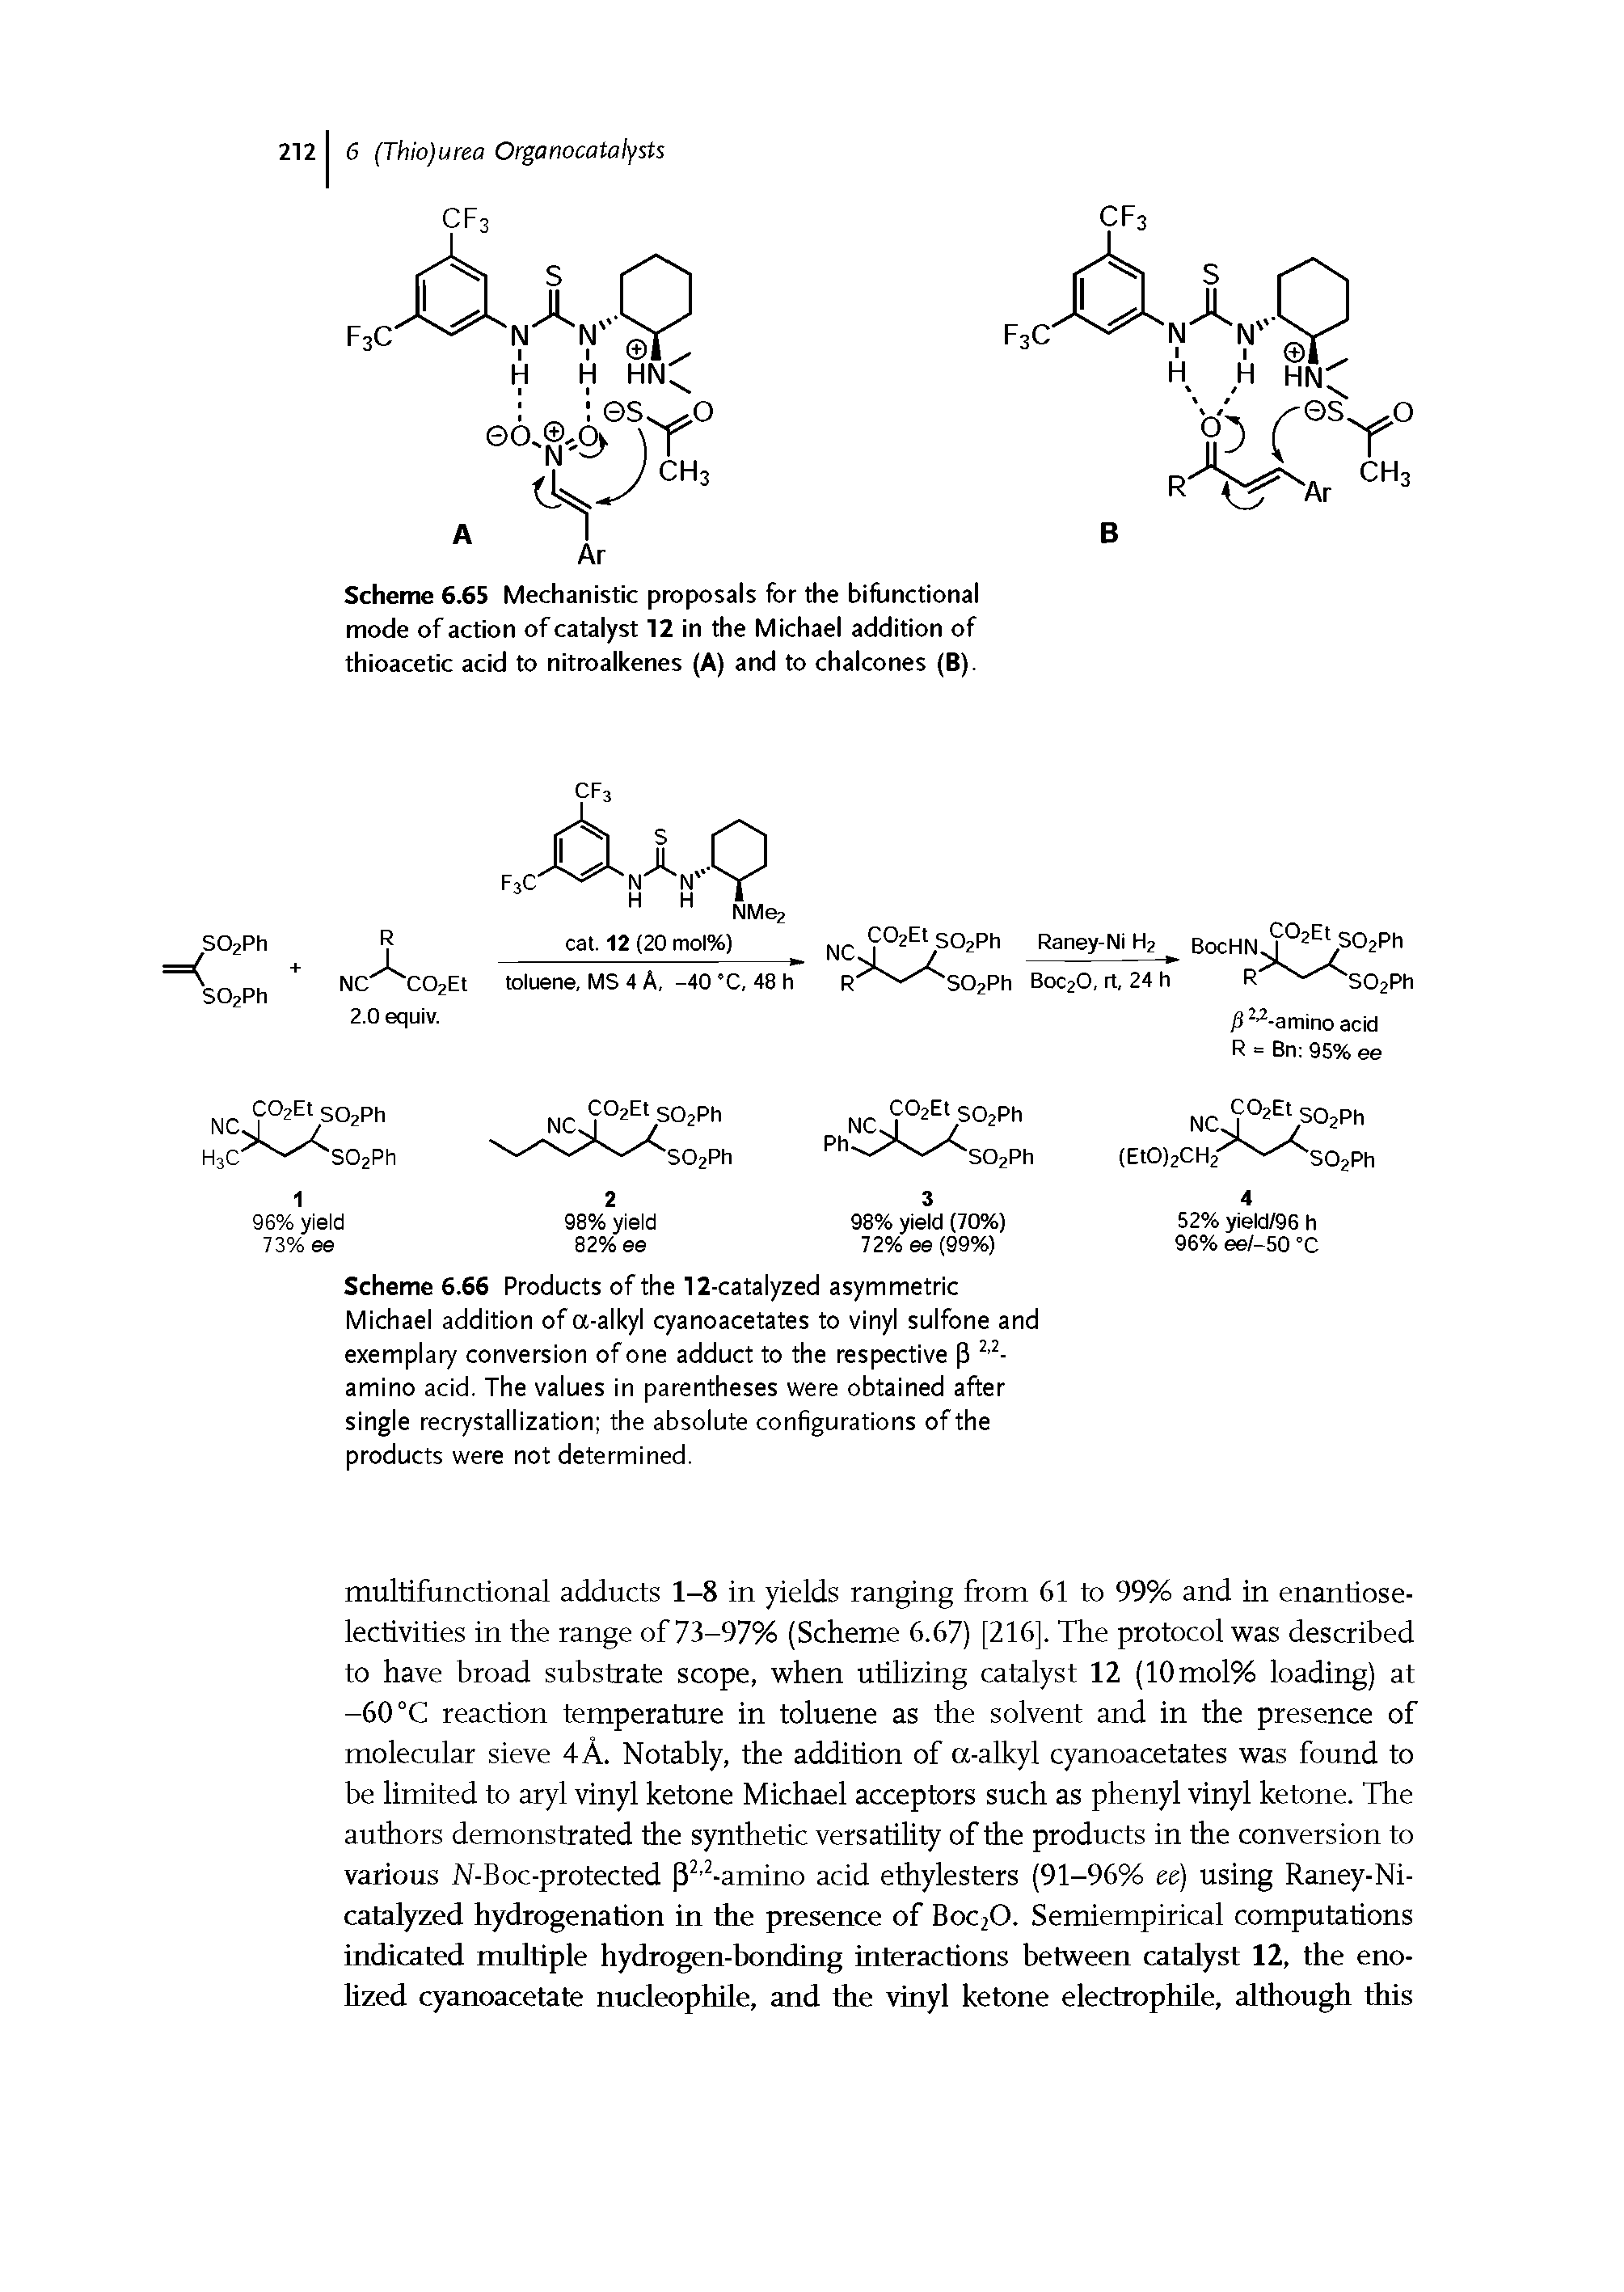 Scheme 6.65 Mechanistic proposals for the biflinctional mode of action of catalyst 12 in the Michael addition of thioacetic acid to nitroalkenes (A) and to chalcones (B).